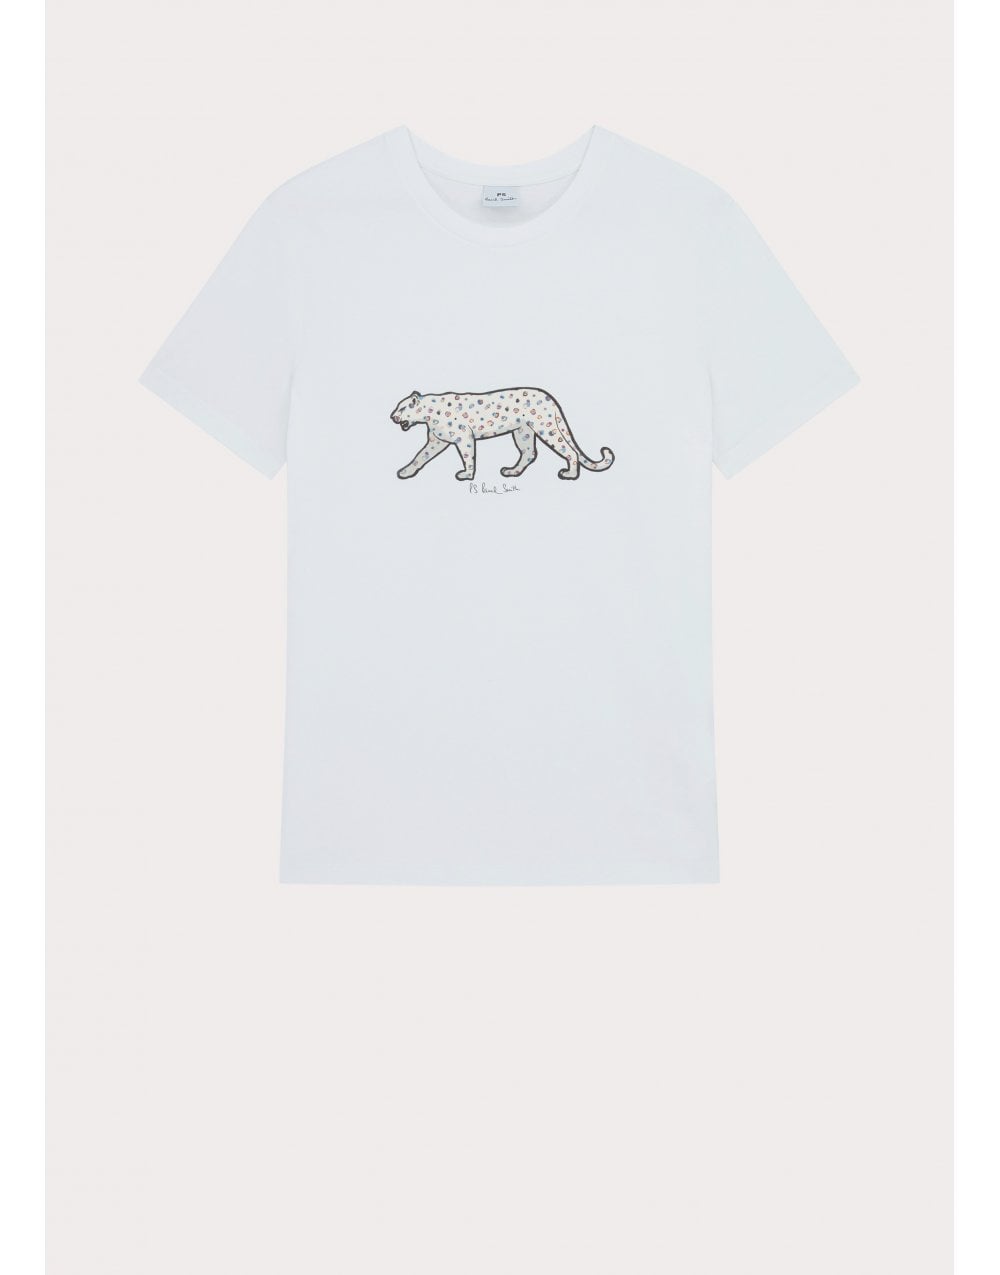 Paul Smith  Ink Stain Cheetah T-shirt Col: 01 White, Size: Xl